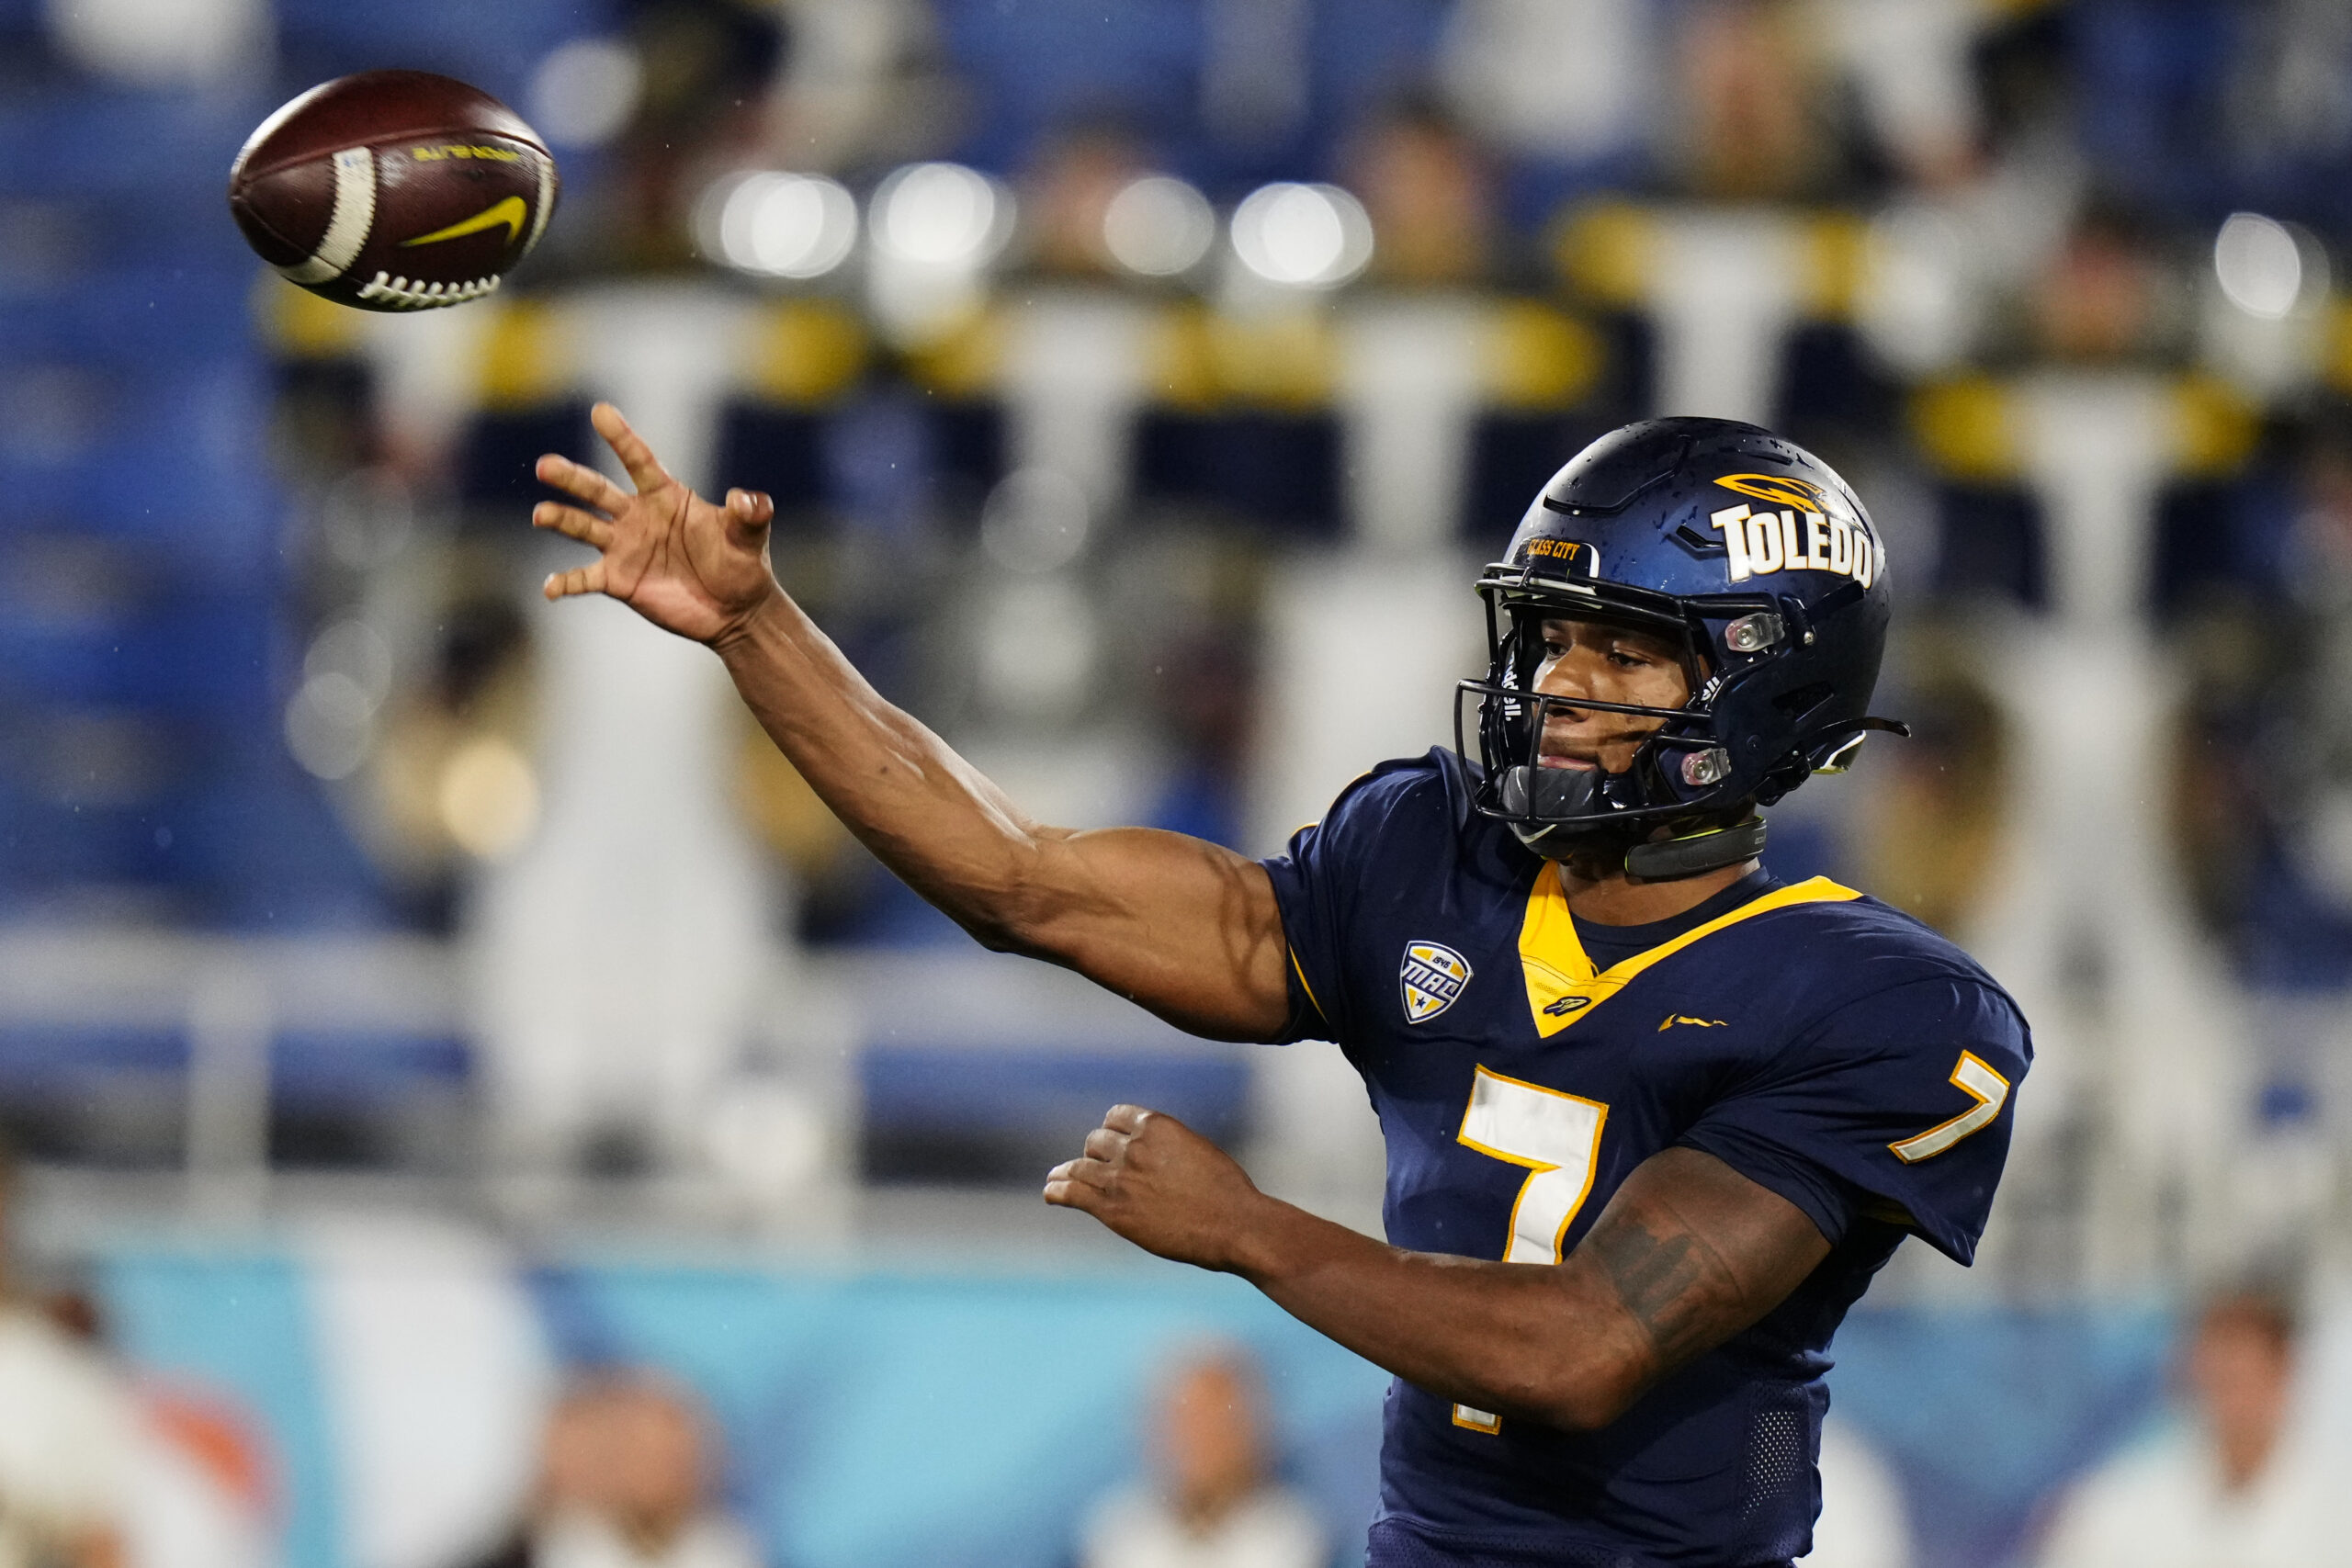 Kent State Golden Flashes vs. Toledo Rockets Football: Game Time